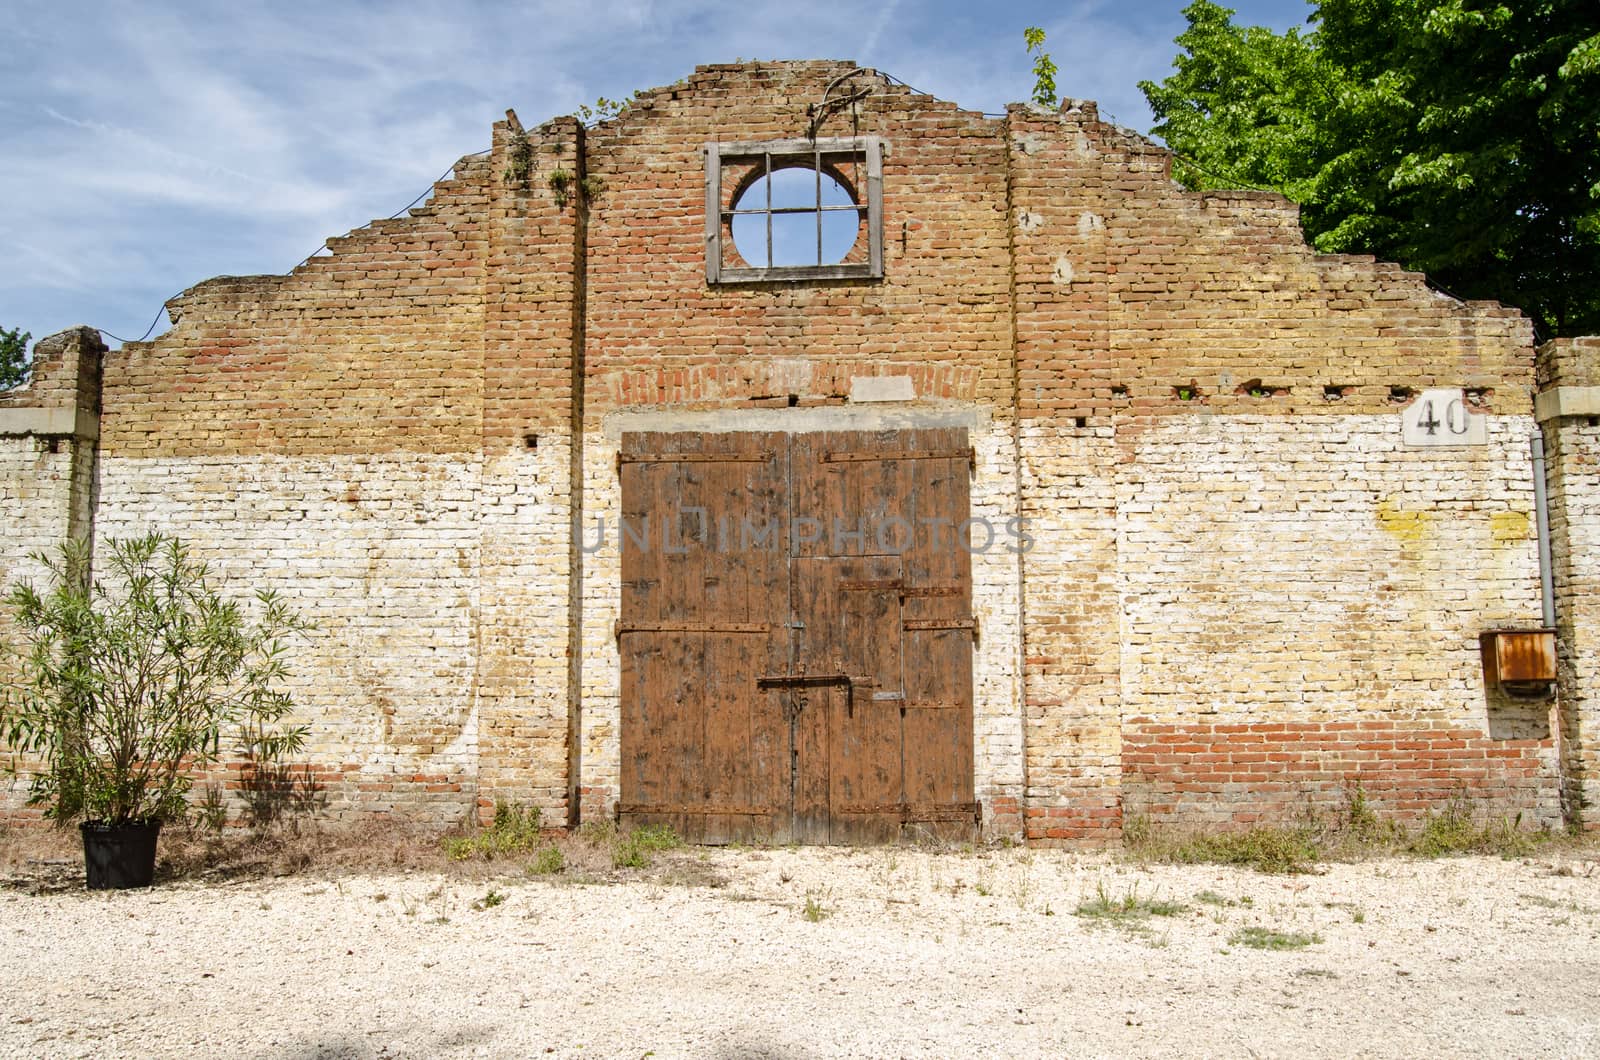 Facade of a disused building at the historic Forte Marghera in Venice, Italy.